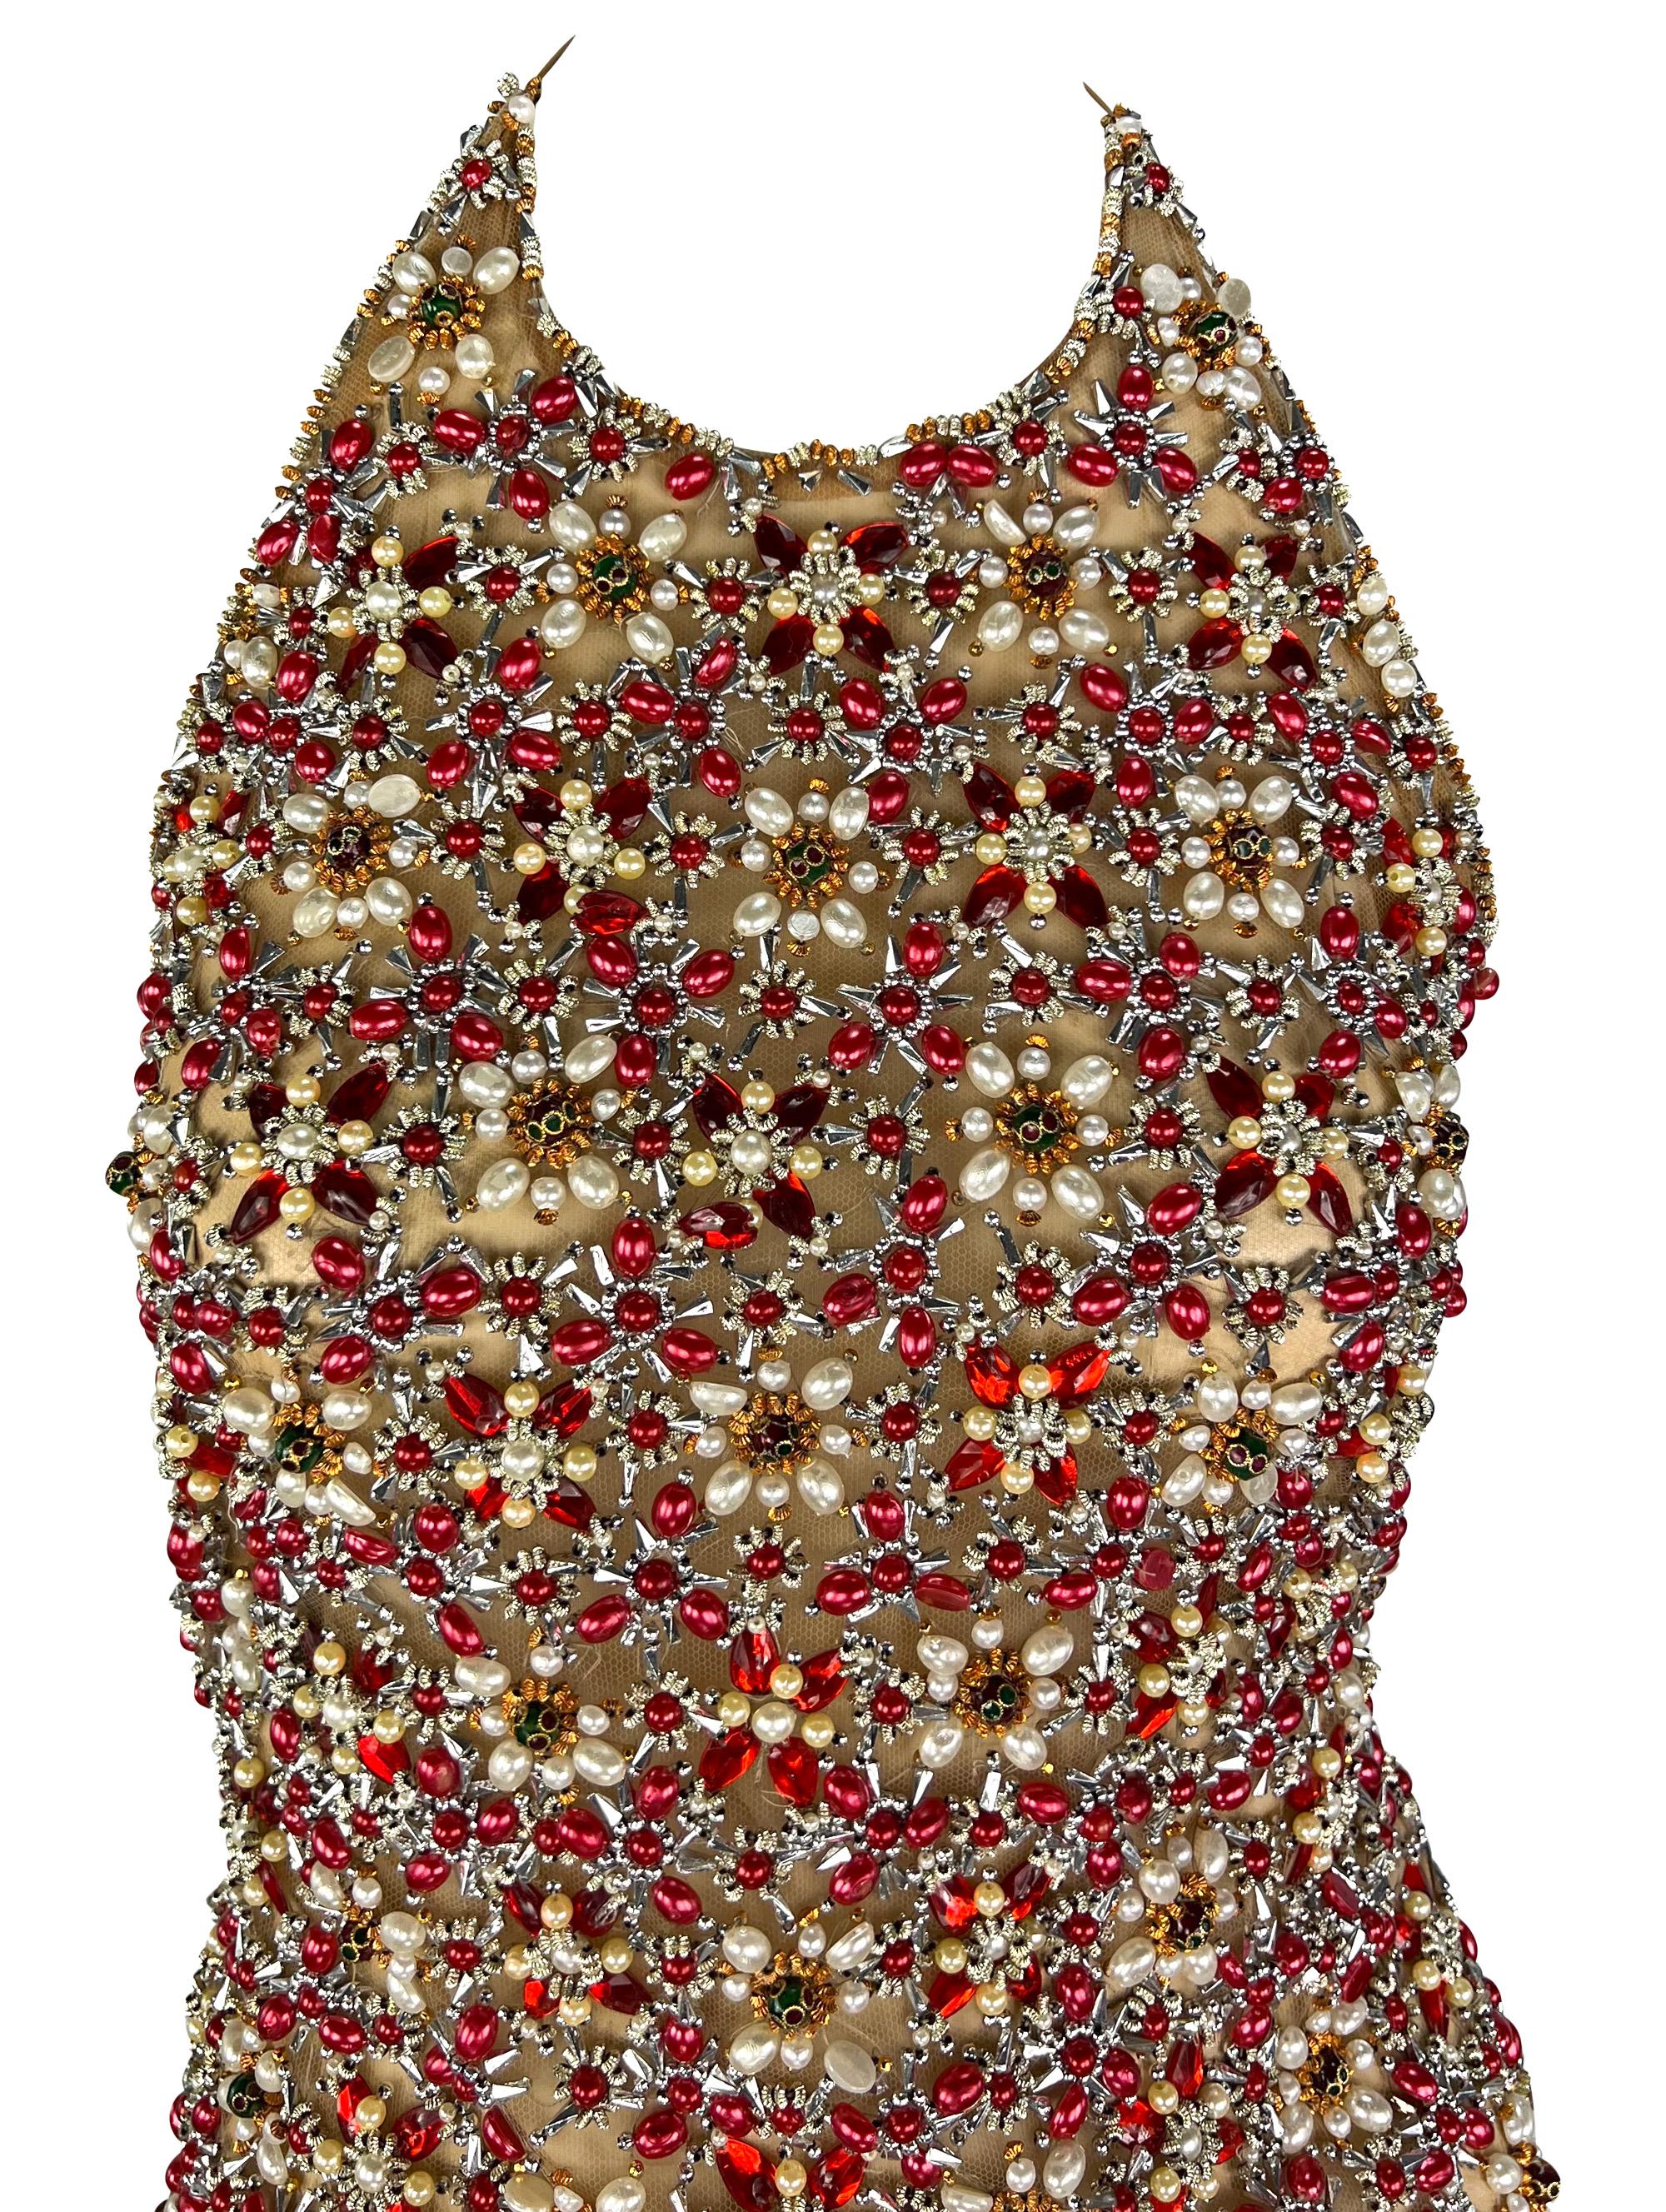 From the Spring/Summer 2006 Gianfranco Ferré collection, this pinafore-style beige mesh top is covered in thousands of faux stones, beads, and pearls. This backless halter top features ties at the back that allow it to be perfectly fitted. This